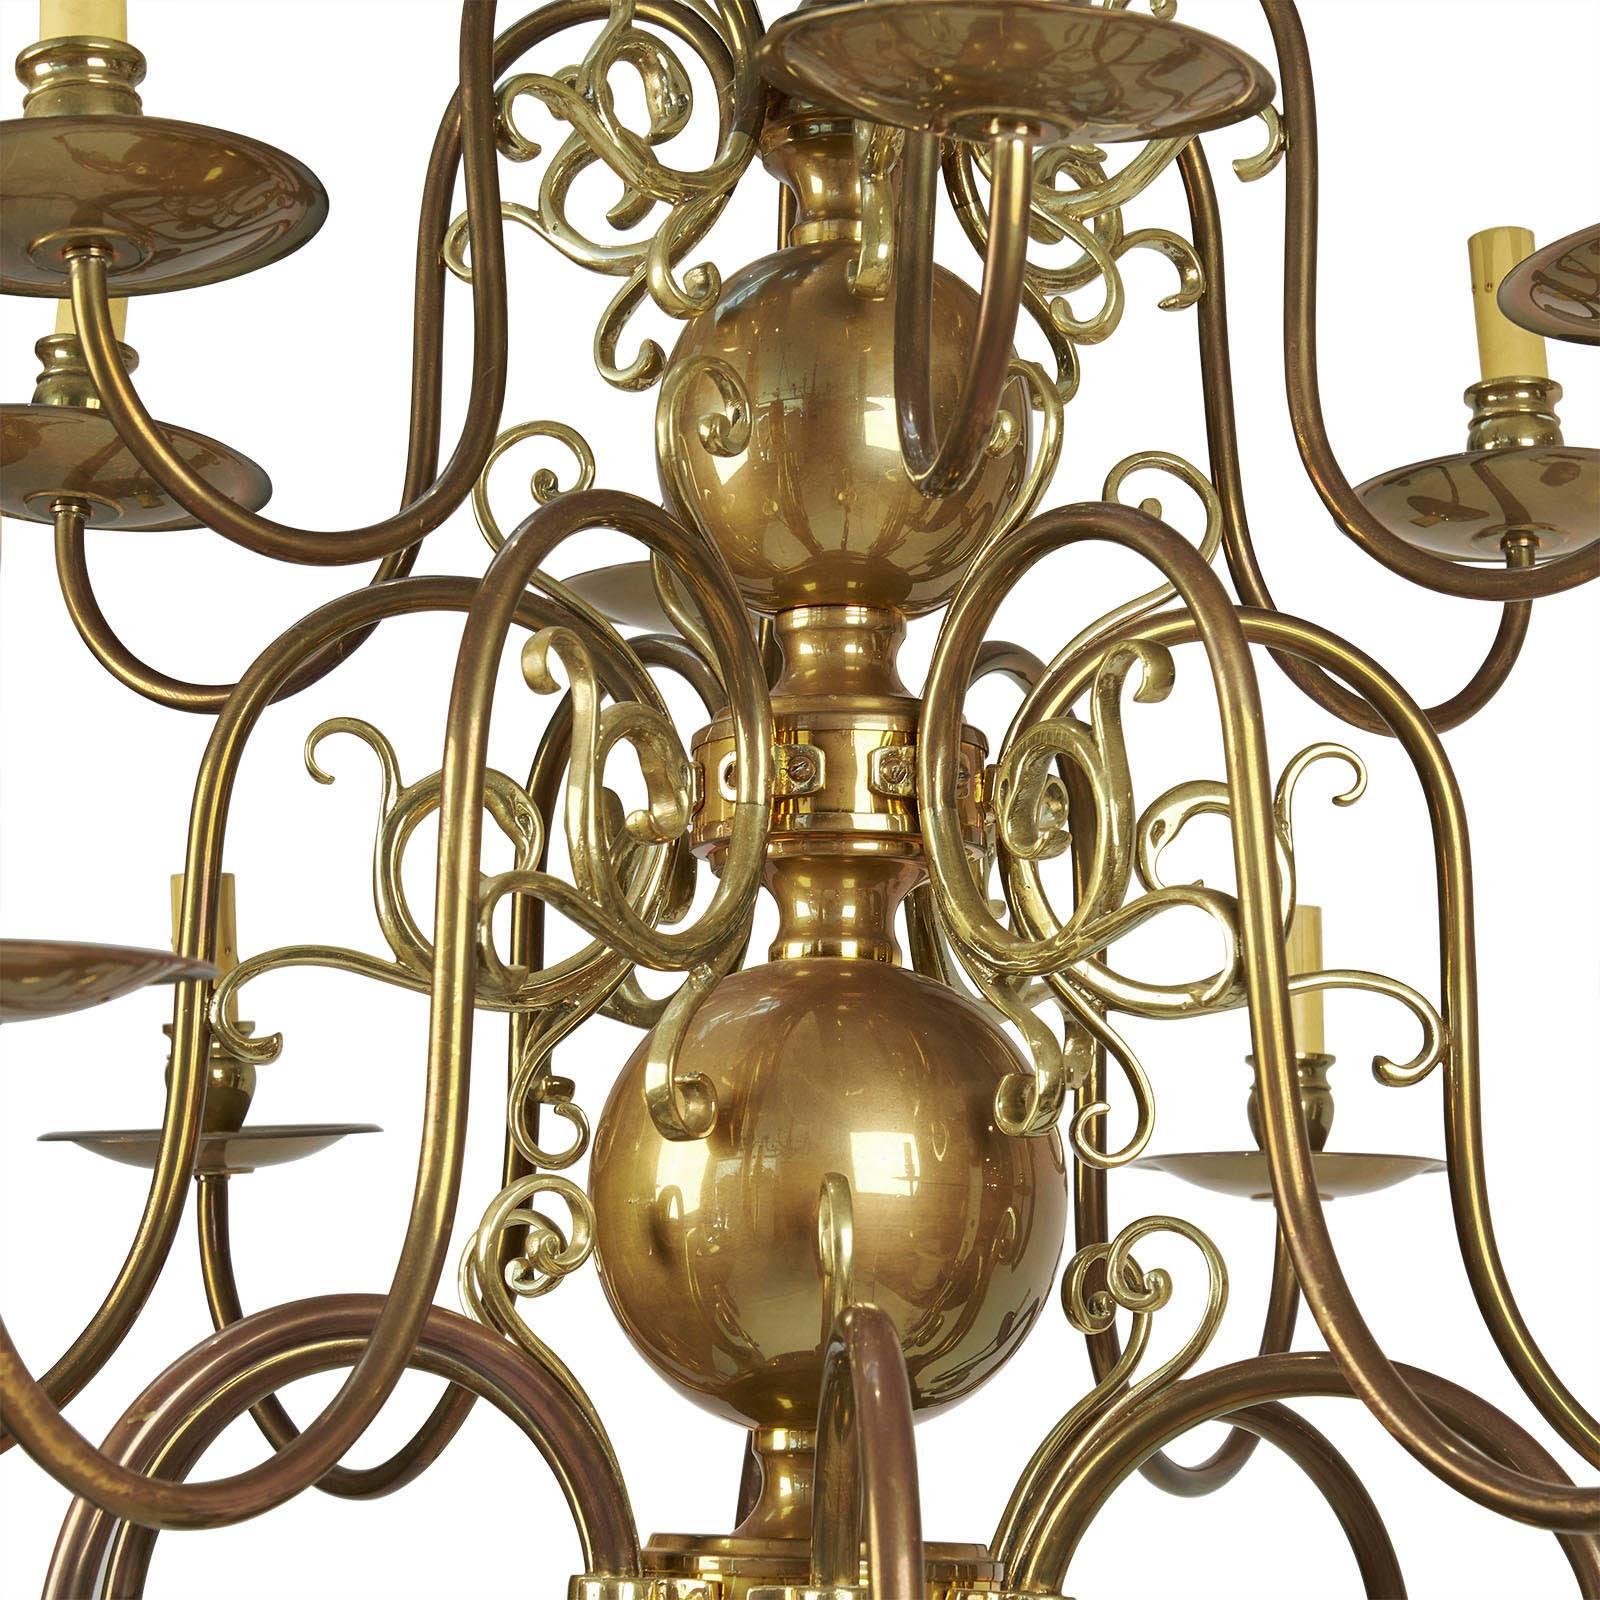 A large Baroque Style brass chandelier, England circa 1920.  Classic design seen often in old master paintings.  Made all over Europe

